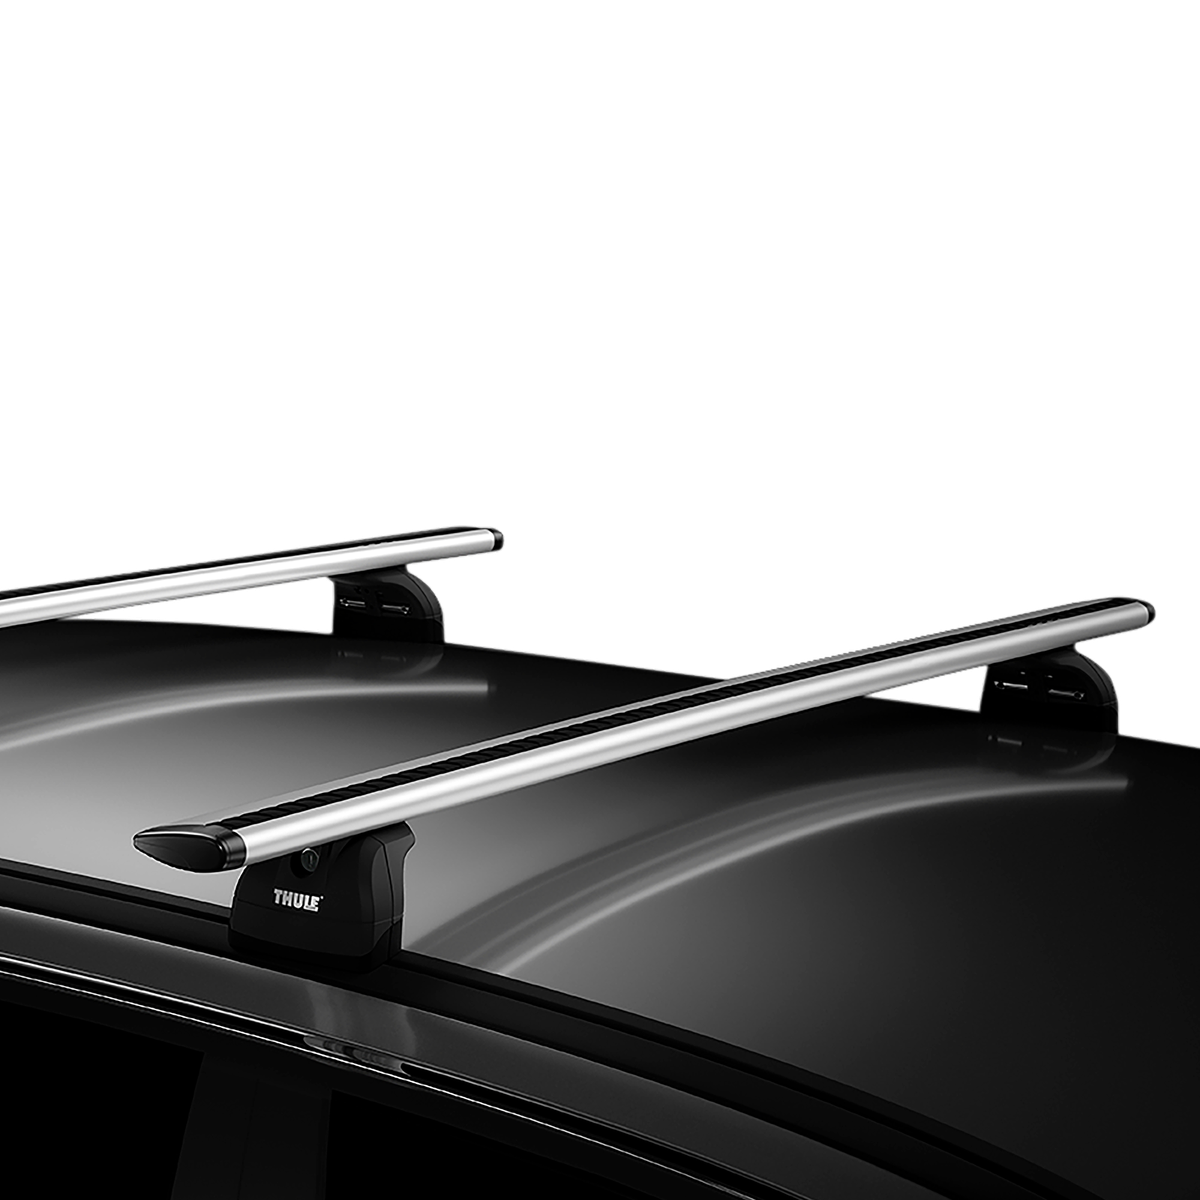 Thule Rapid System 753, 7531 foot for vehicles